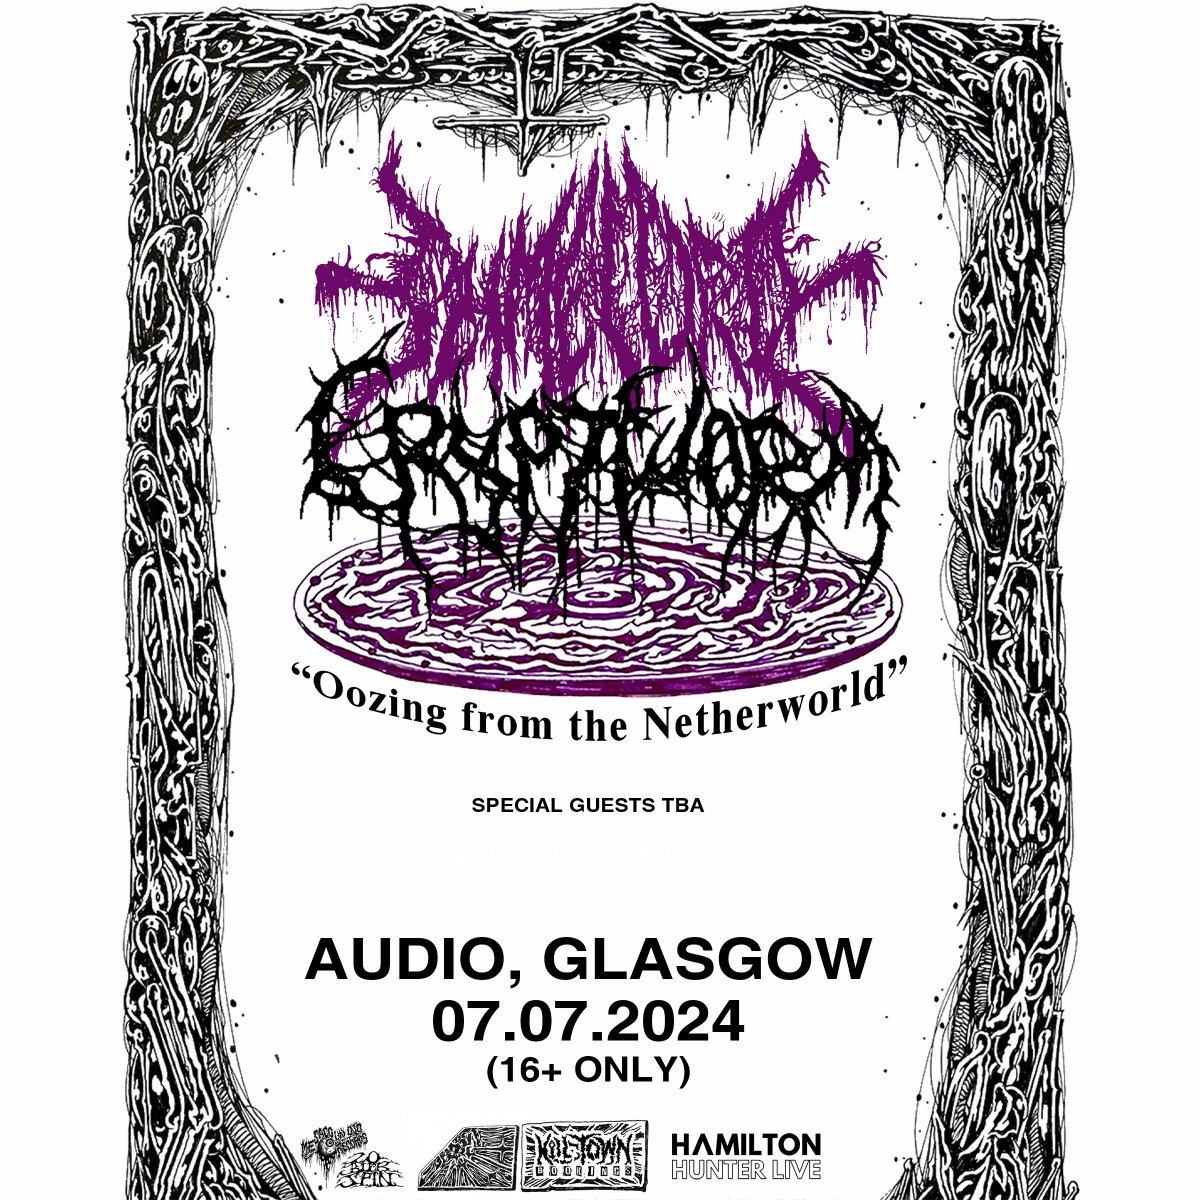 ON SALE NOW 📢 Slimelord & Cryptworm on the 07.07.2024 @ Audio UK death metal bands, Slimelord and Cryptworm team up in this co-headline show hitting Glasgow. Grab Your Tickets here ➡️t-s.co/slim7